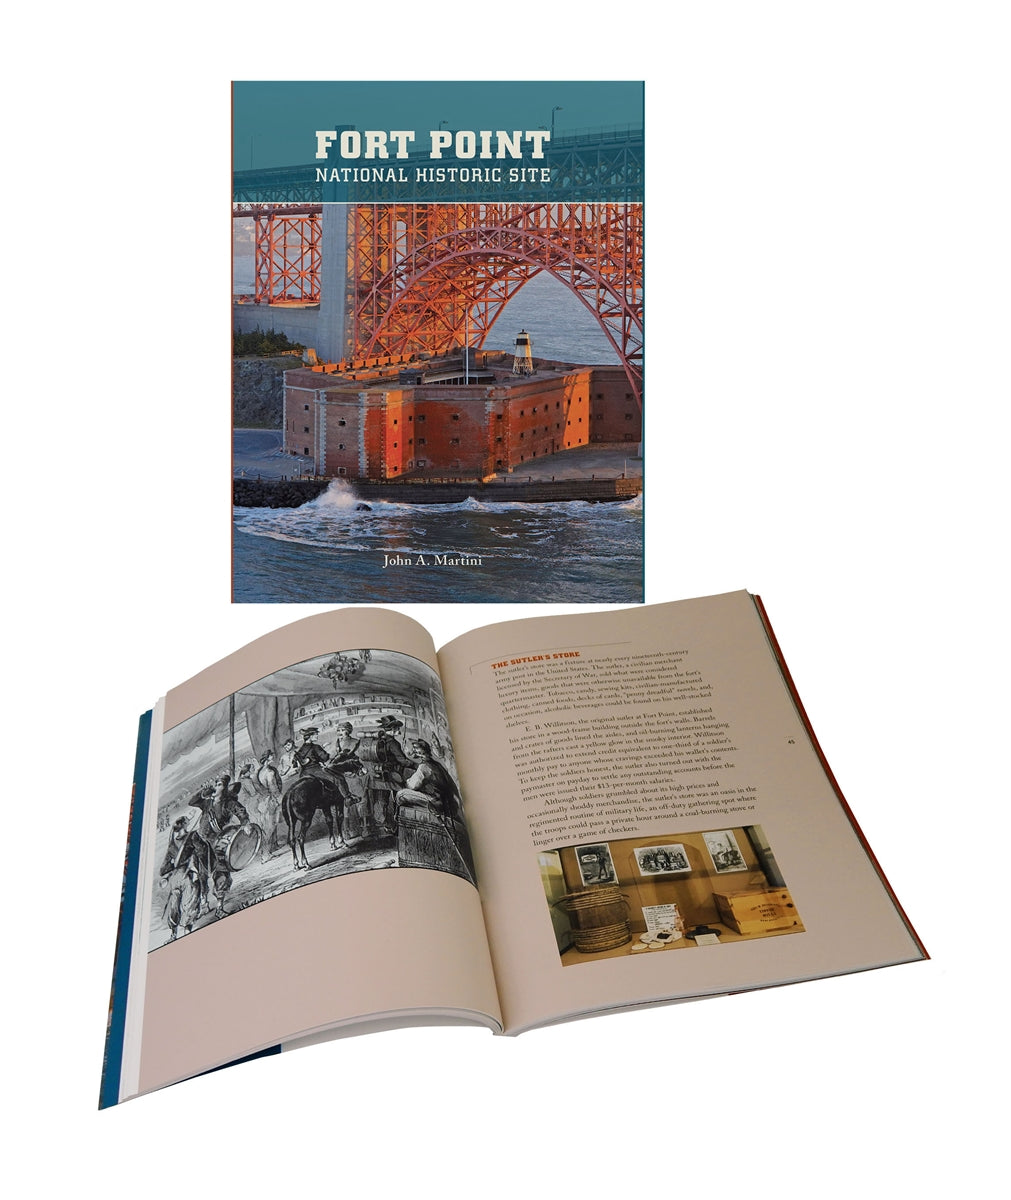 Fort Point National Historic Site book by John A. Martini, featuring color photographs of San Francisco's Civil War-era fort.